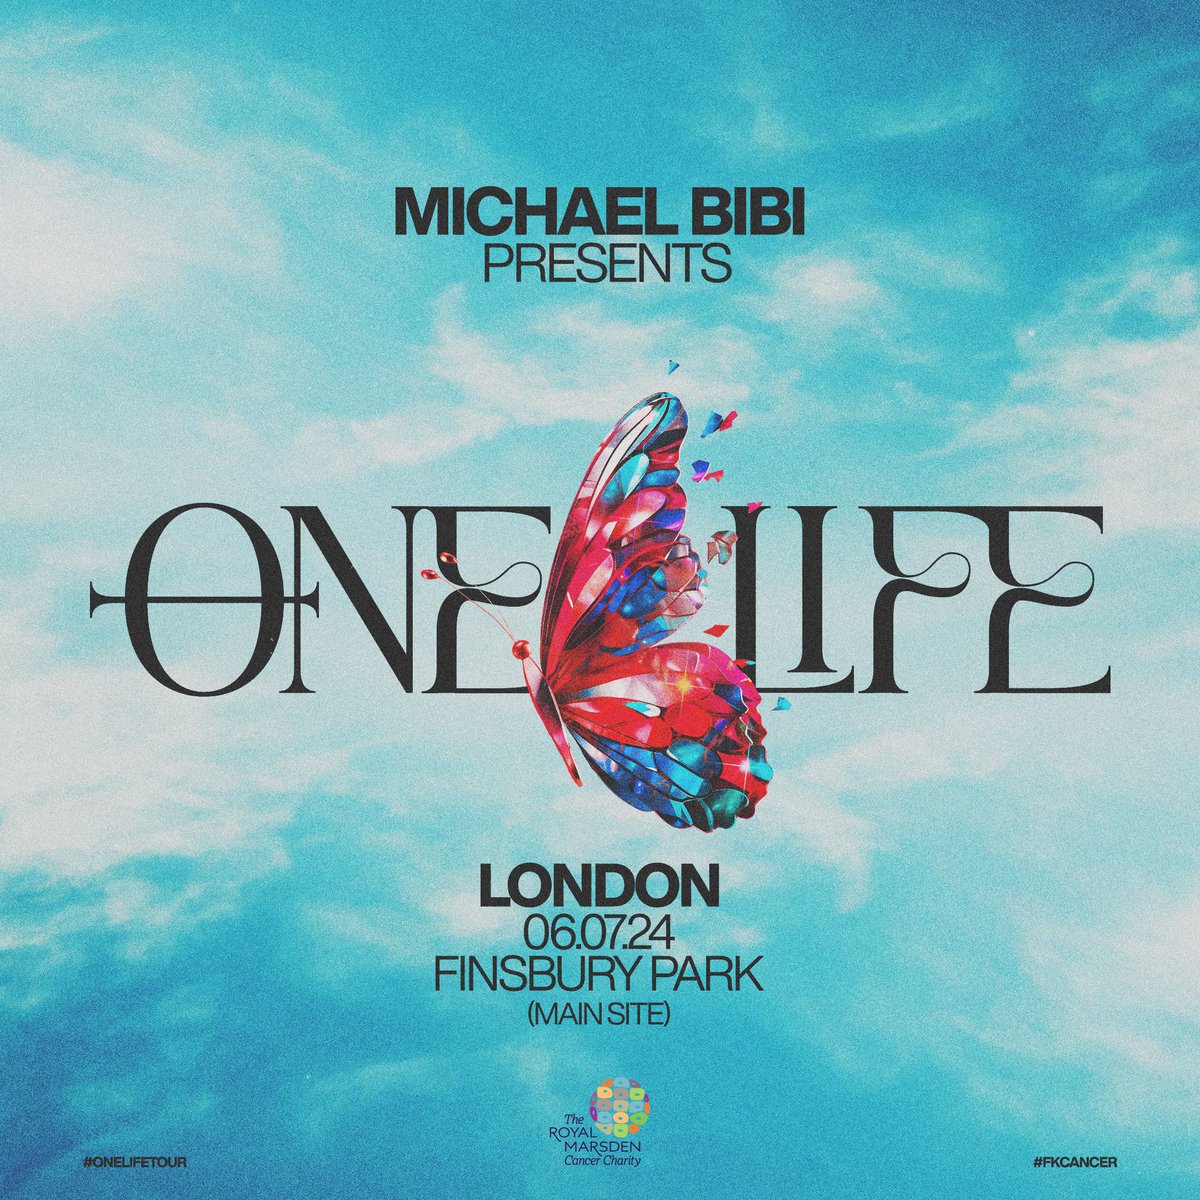 Michael Bibi presents One Life returns to the global stage this summer at London's Finsbury Park on 6 July. Tickets on sale now > bit.ly/3vPTO6s @michaelbibi1